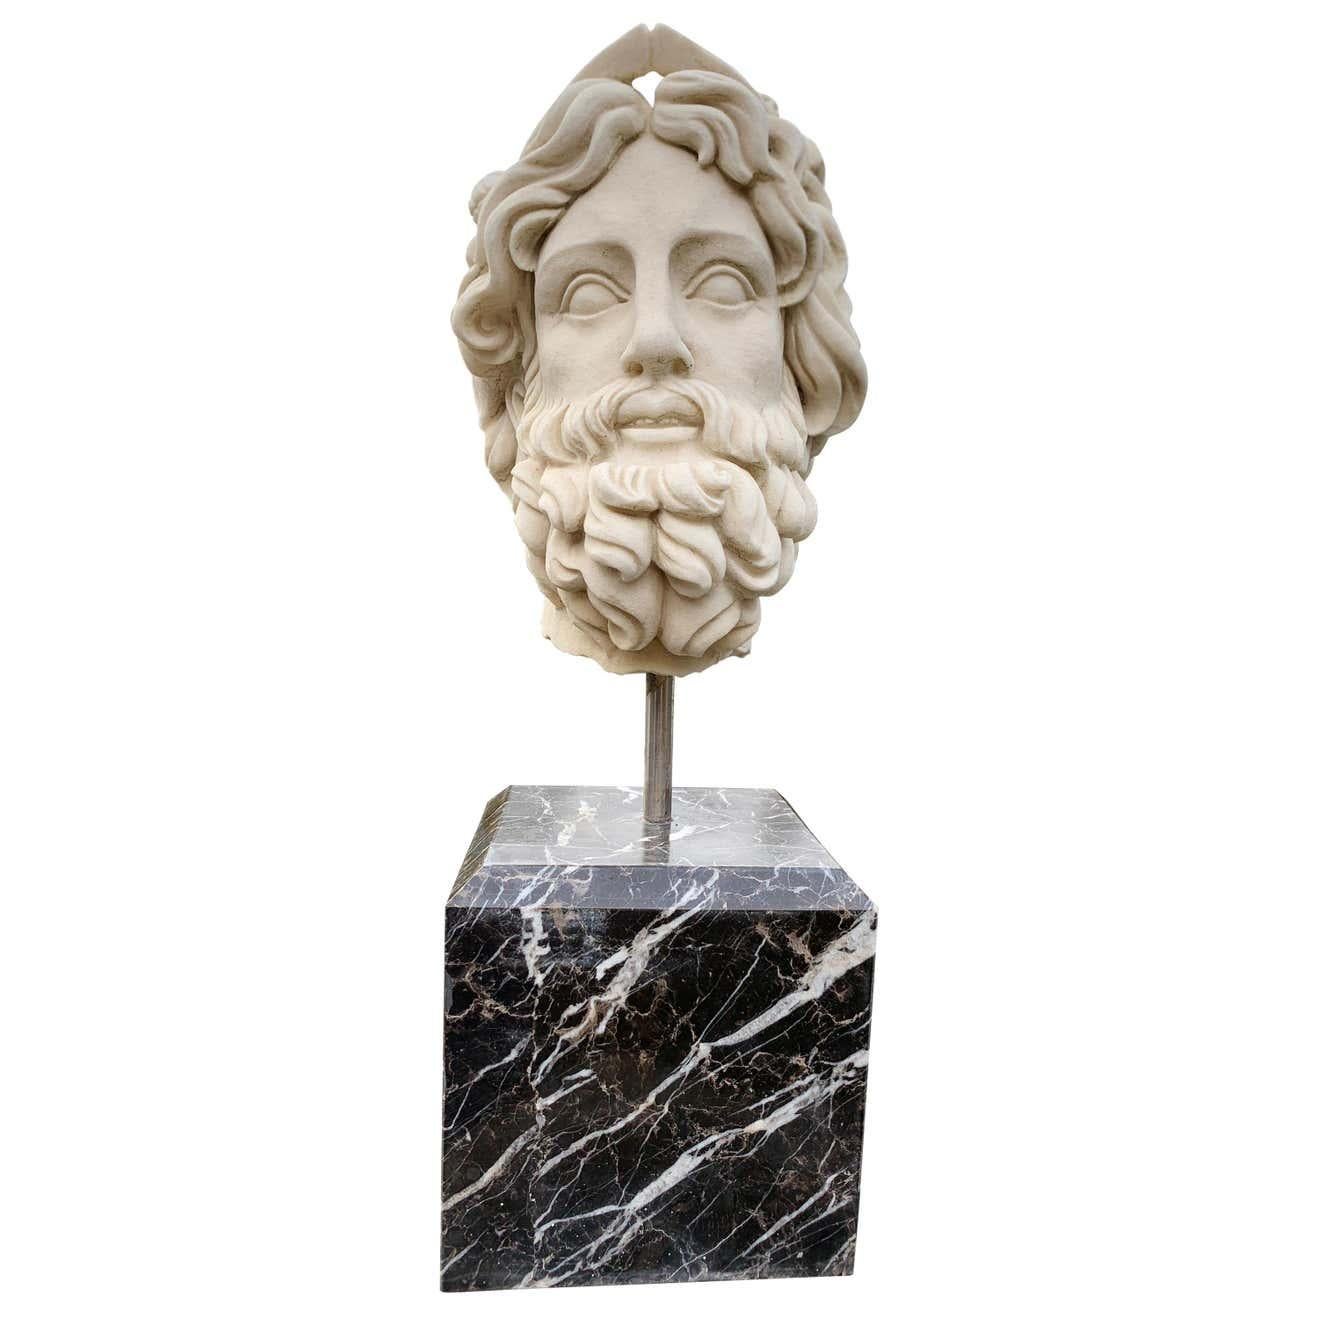 Wonderful marble bust of the Roman God of the water Neptune. Gorgeous piece standing on a black marble pedestal base. We've pictured it on a marble column which is not part of the listing but available. Great piece for adding an air of classical